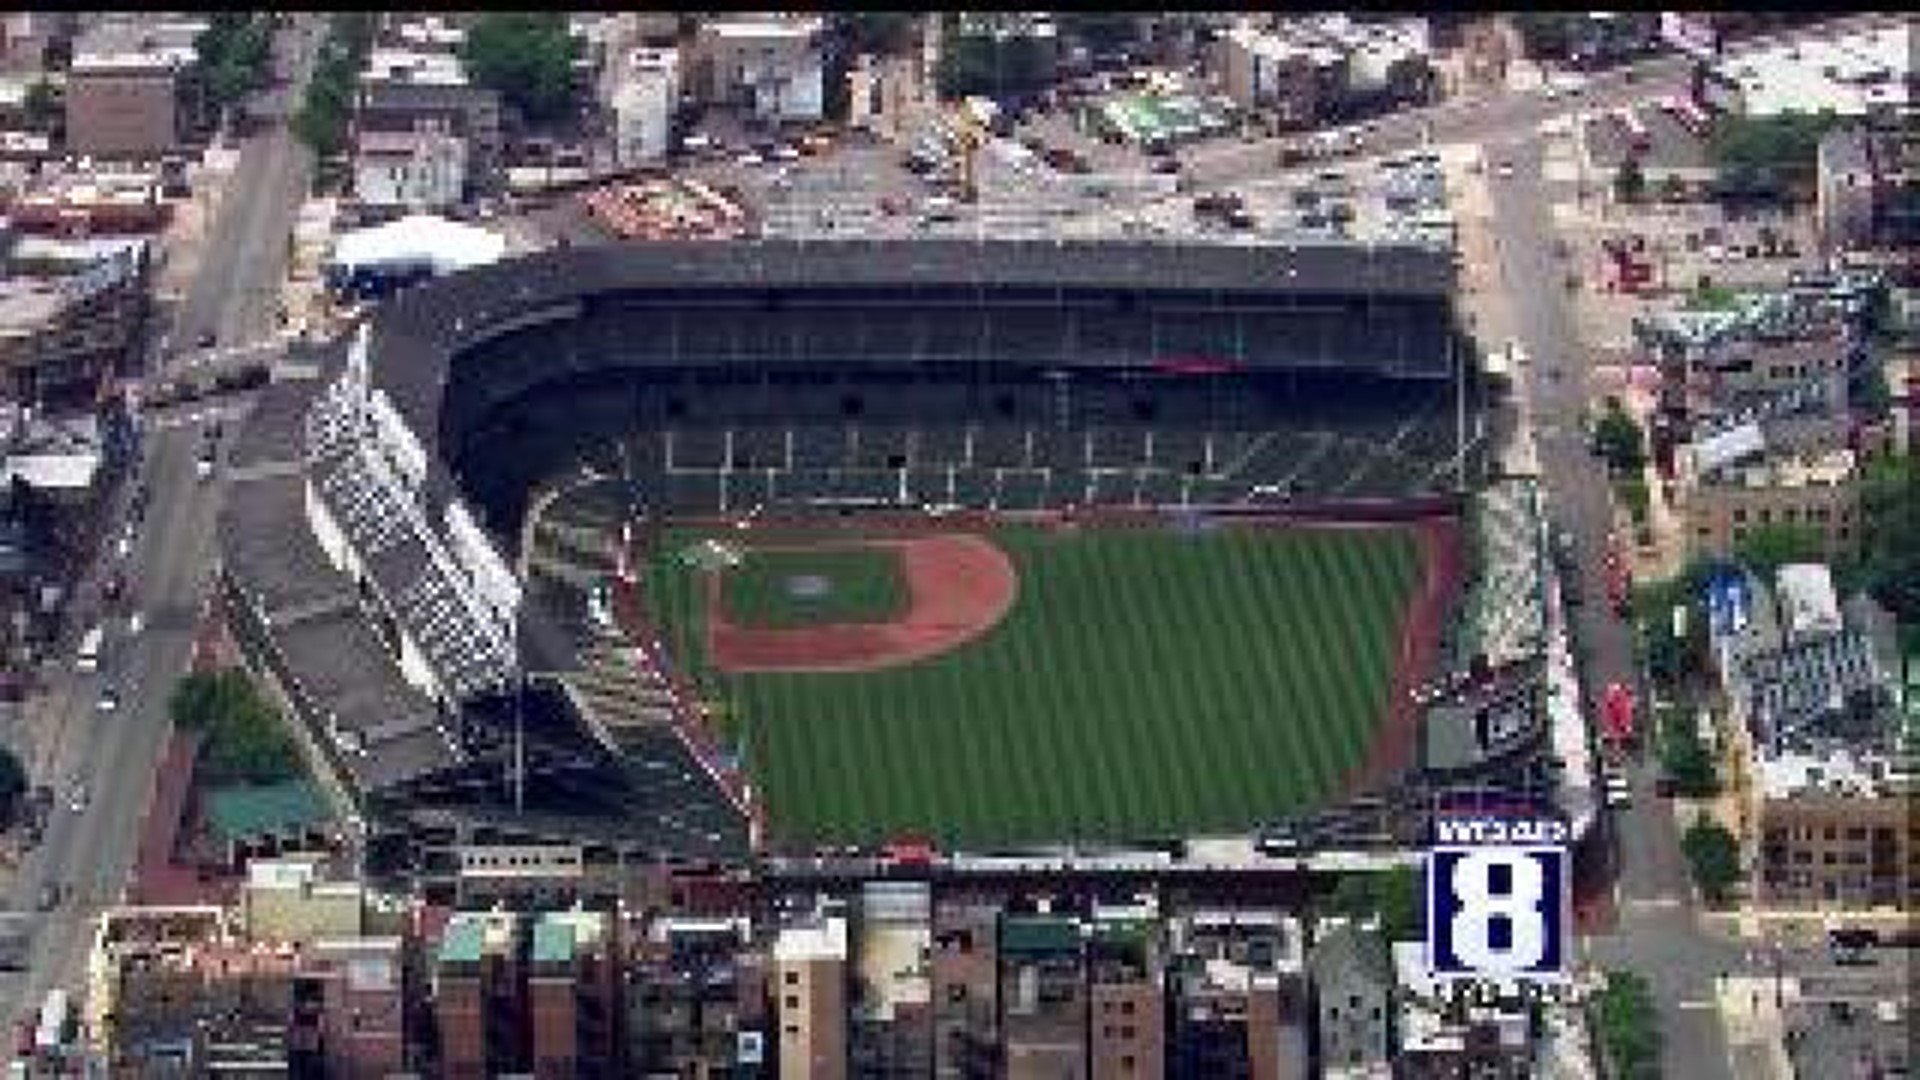 Wrigley Field approved for expansion